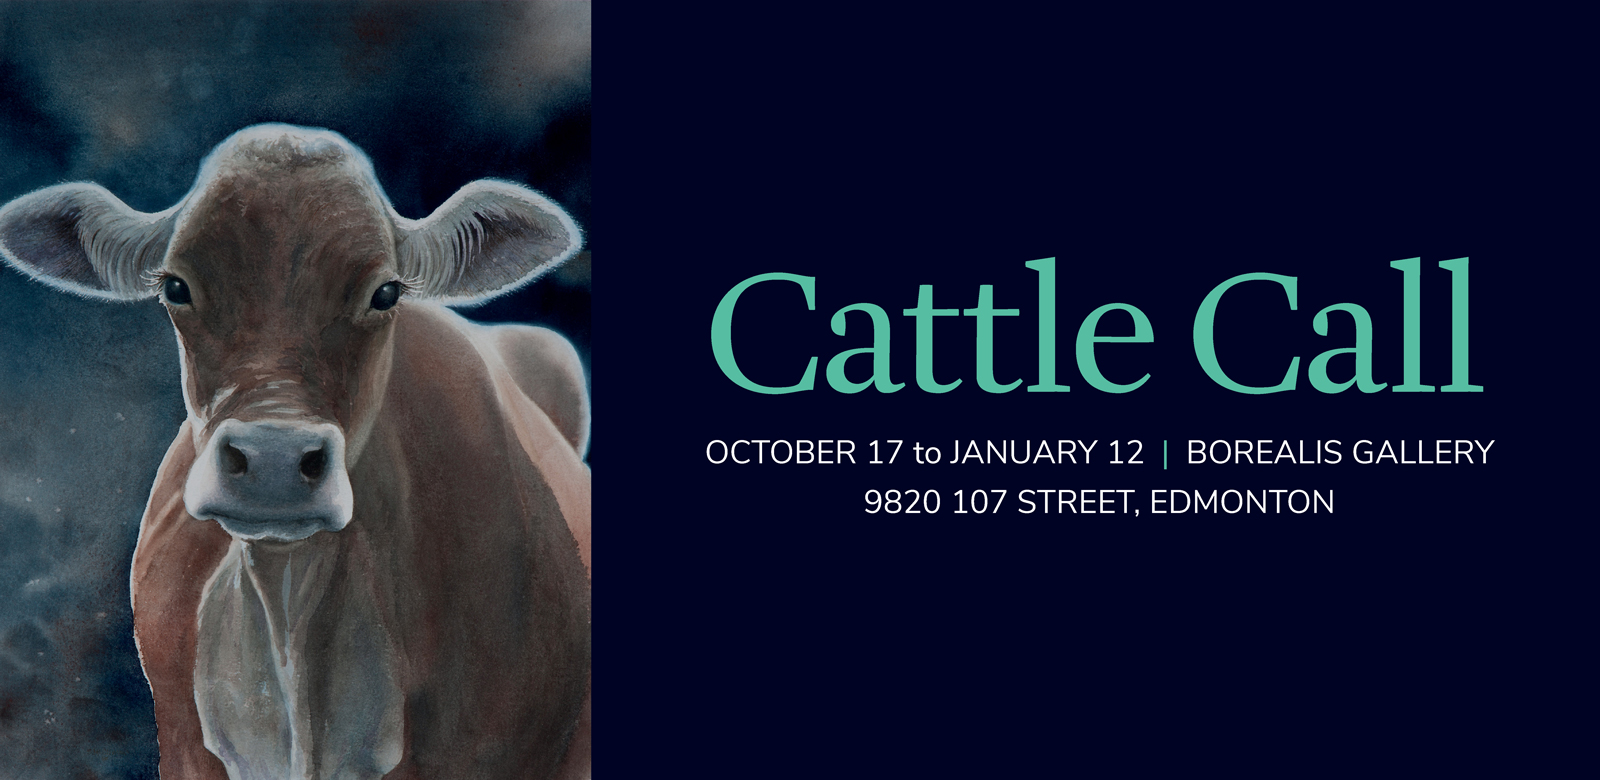 October 17, 2019 to January 12, 2020 - Cattle Call